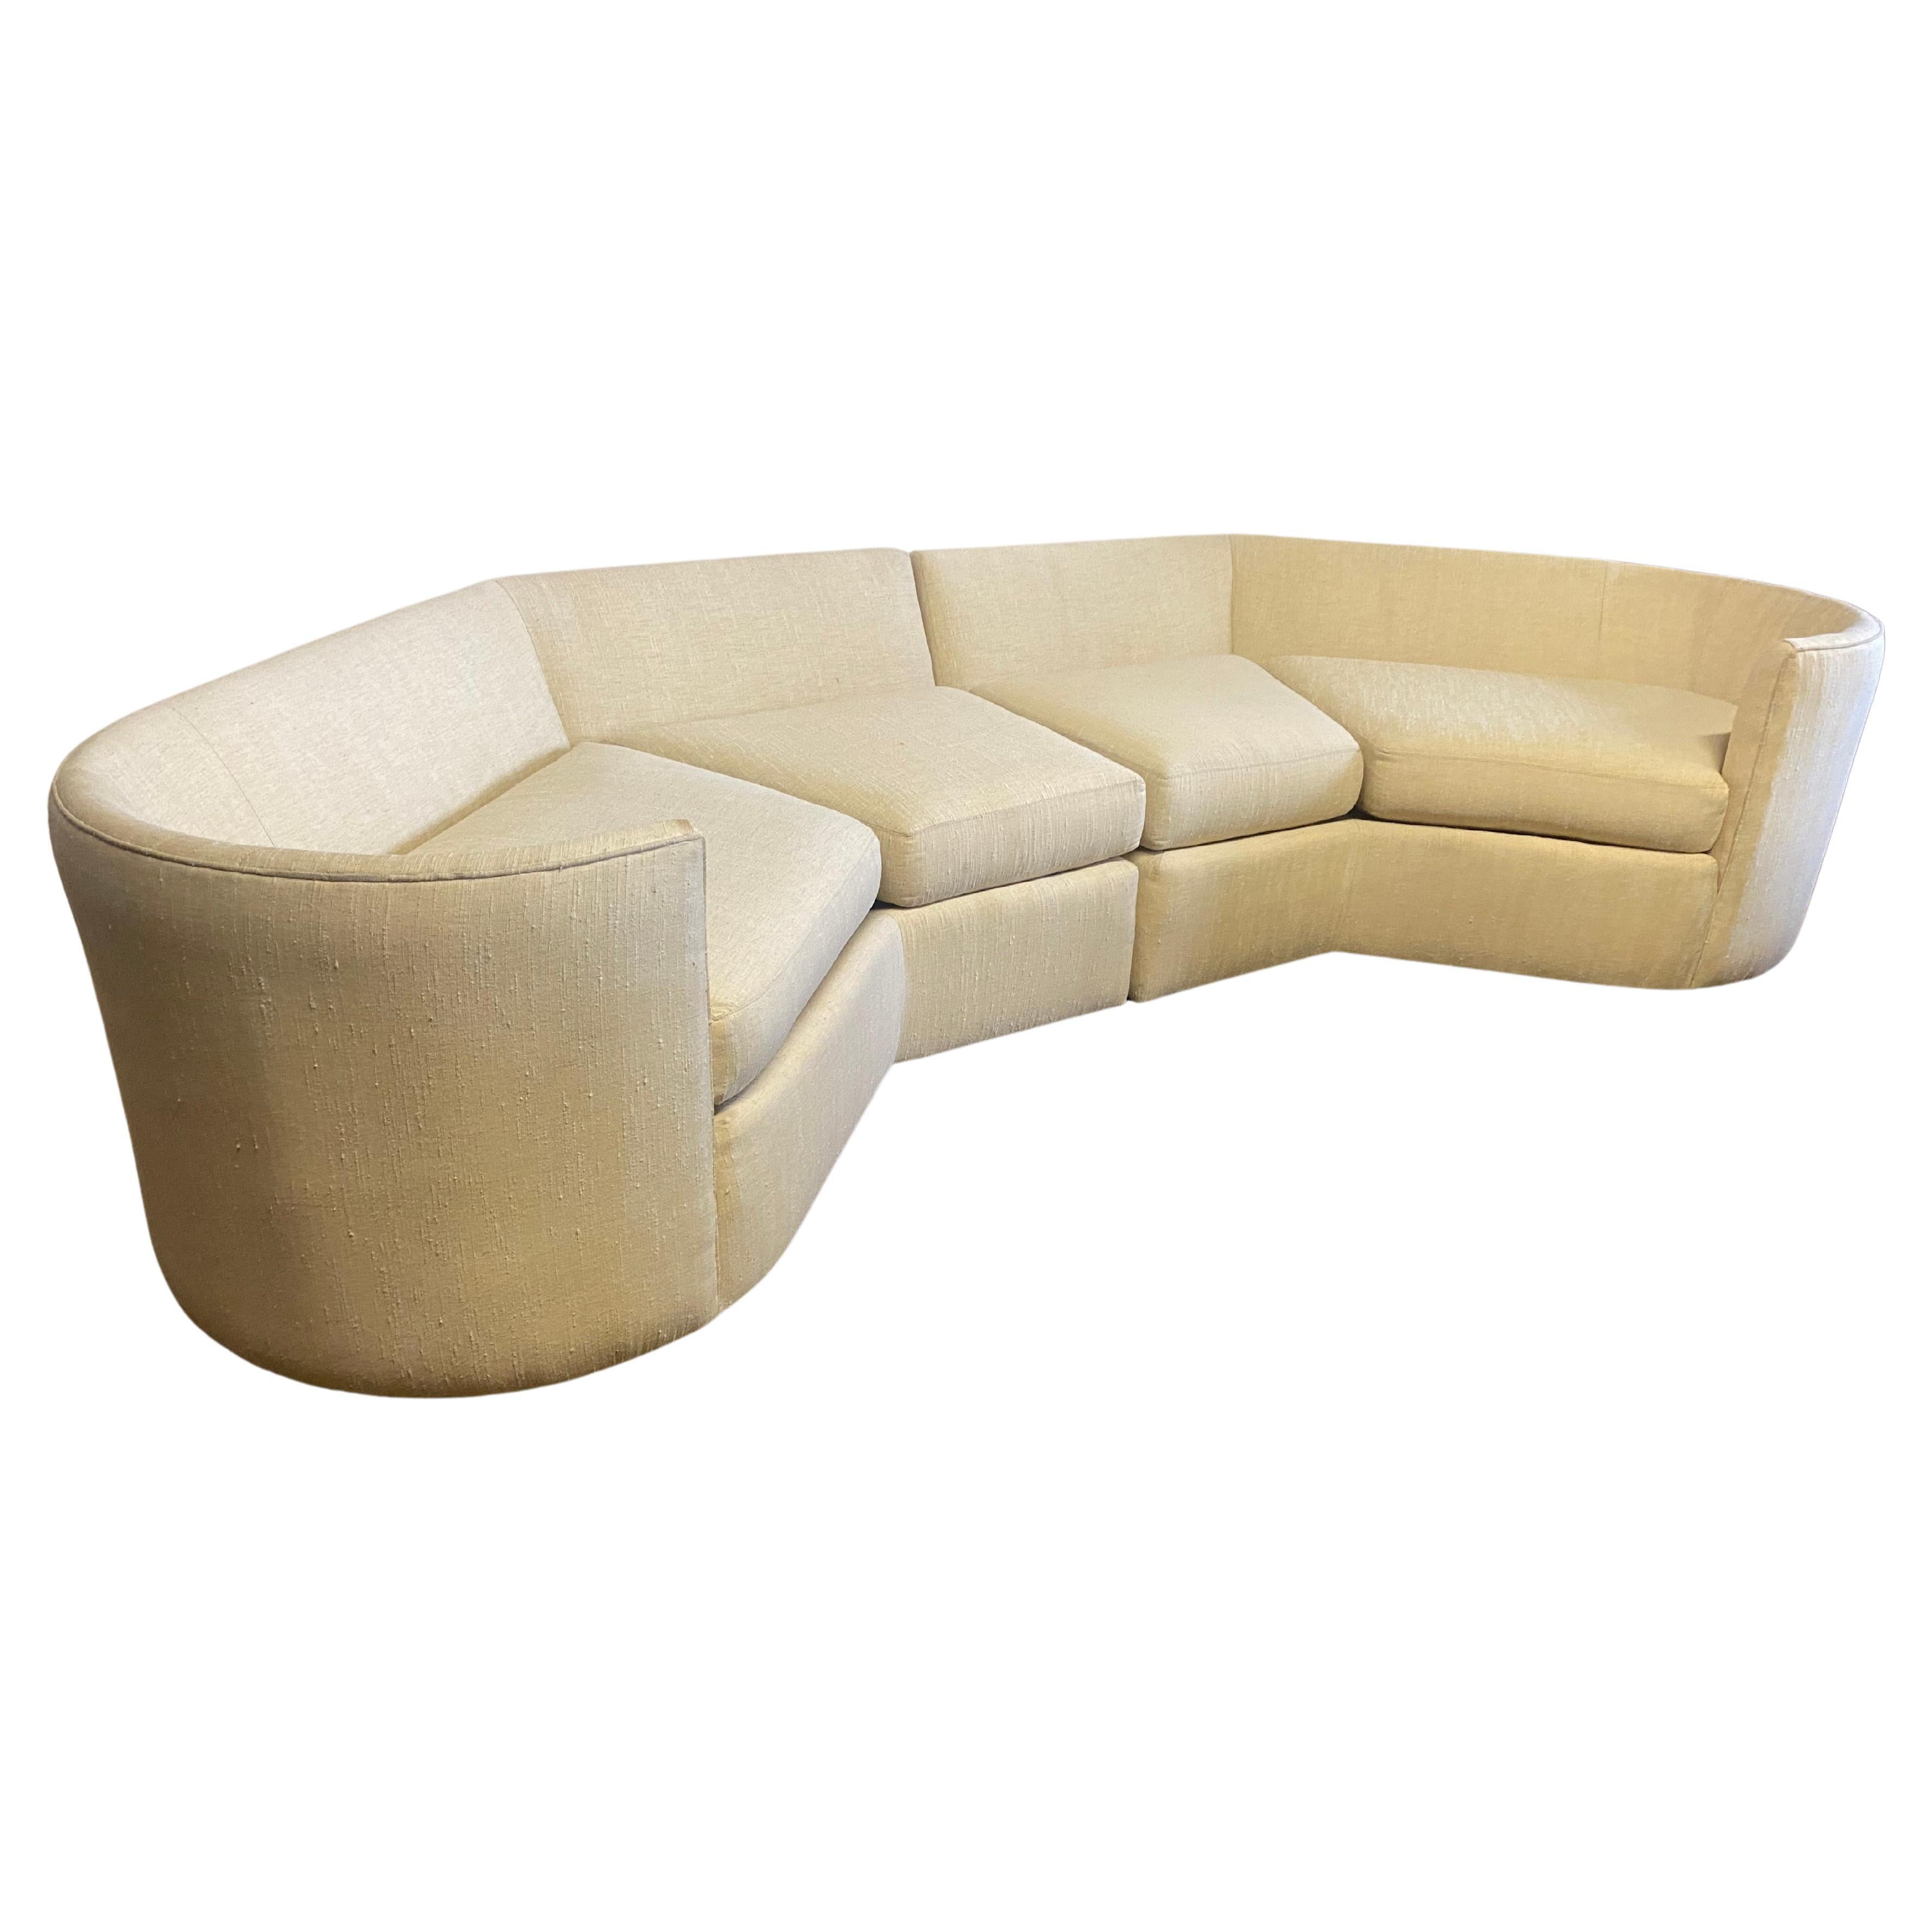 Post Modernist Two-Piece Contemporary Sofa by Charak Furniture Co.